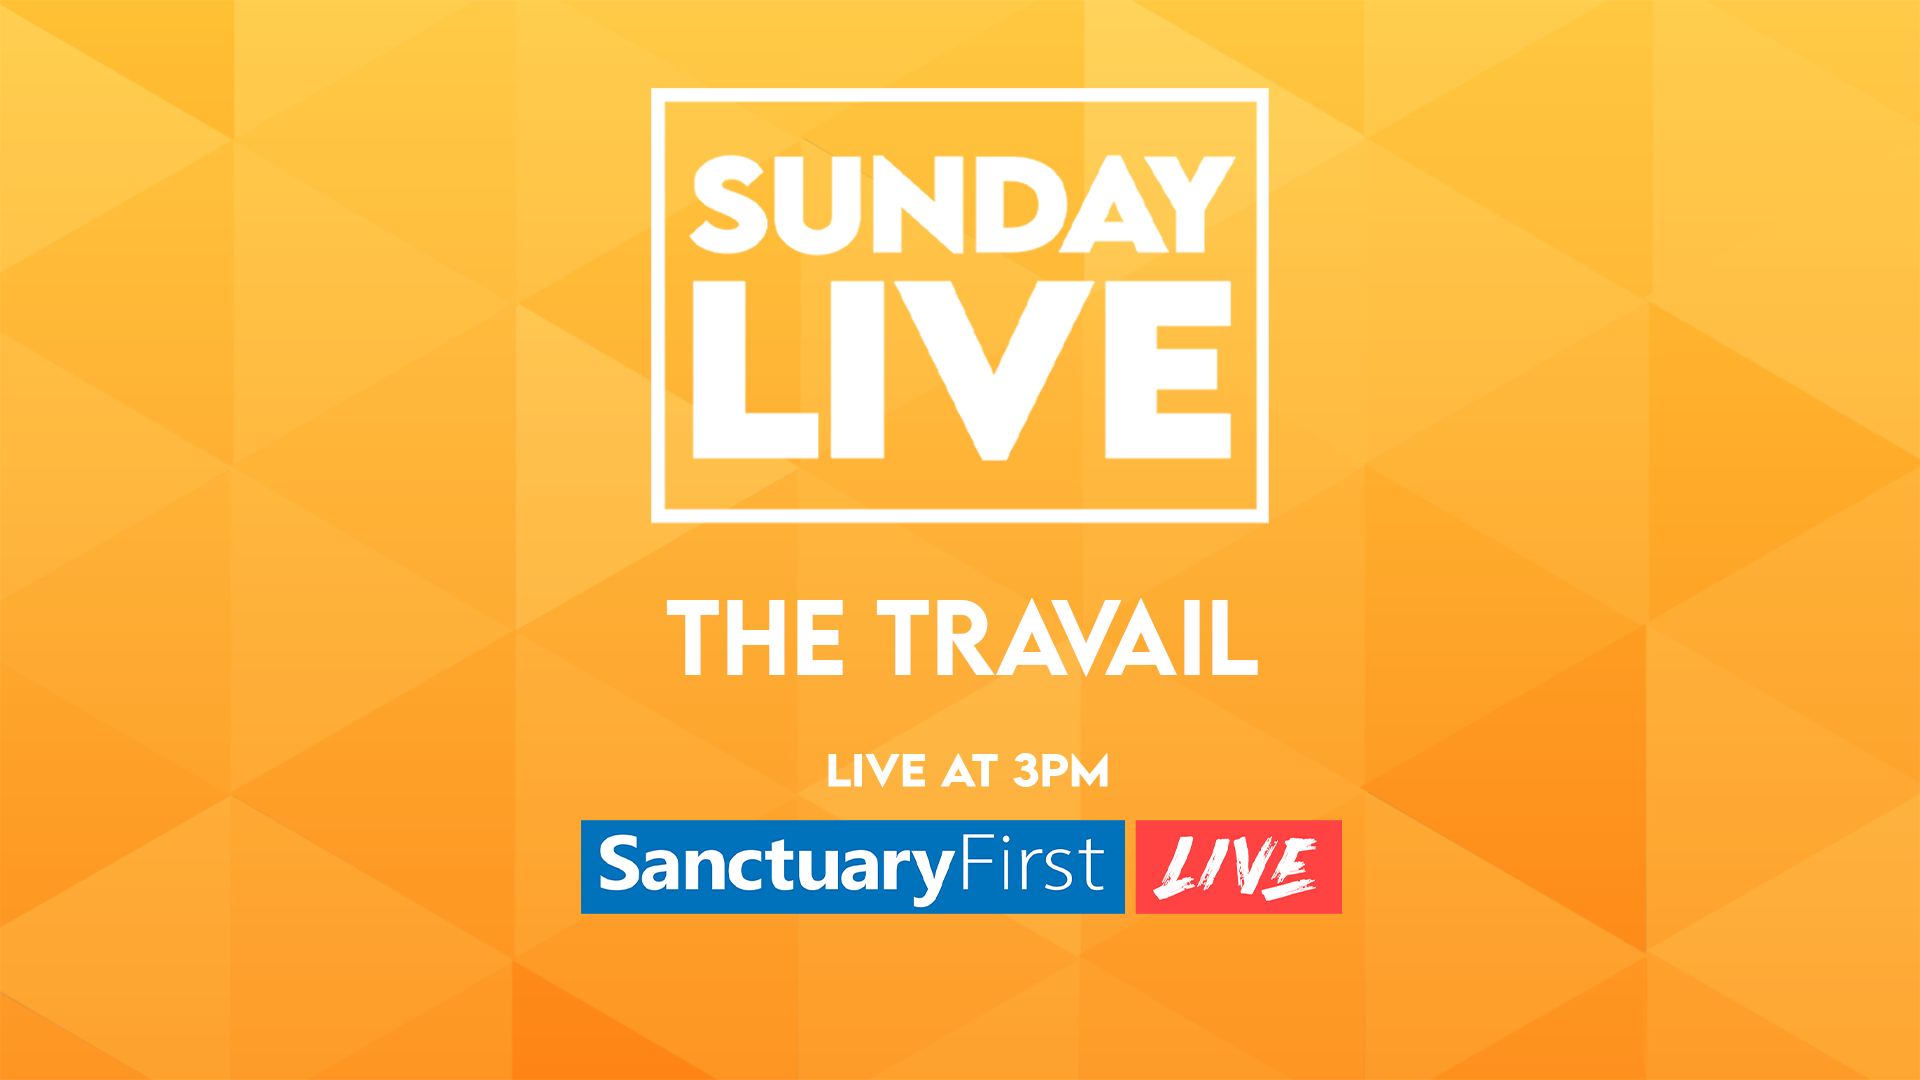 Sunday Live - The Travail